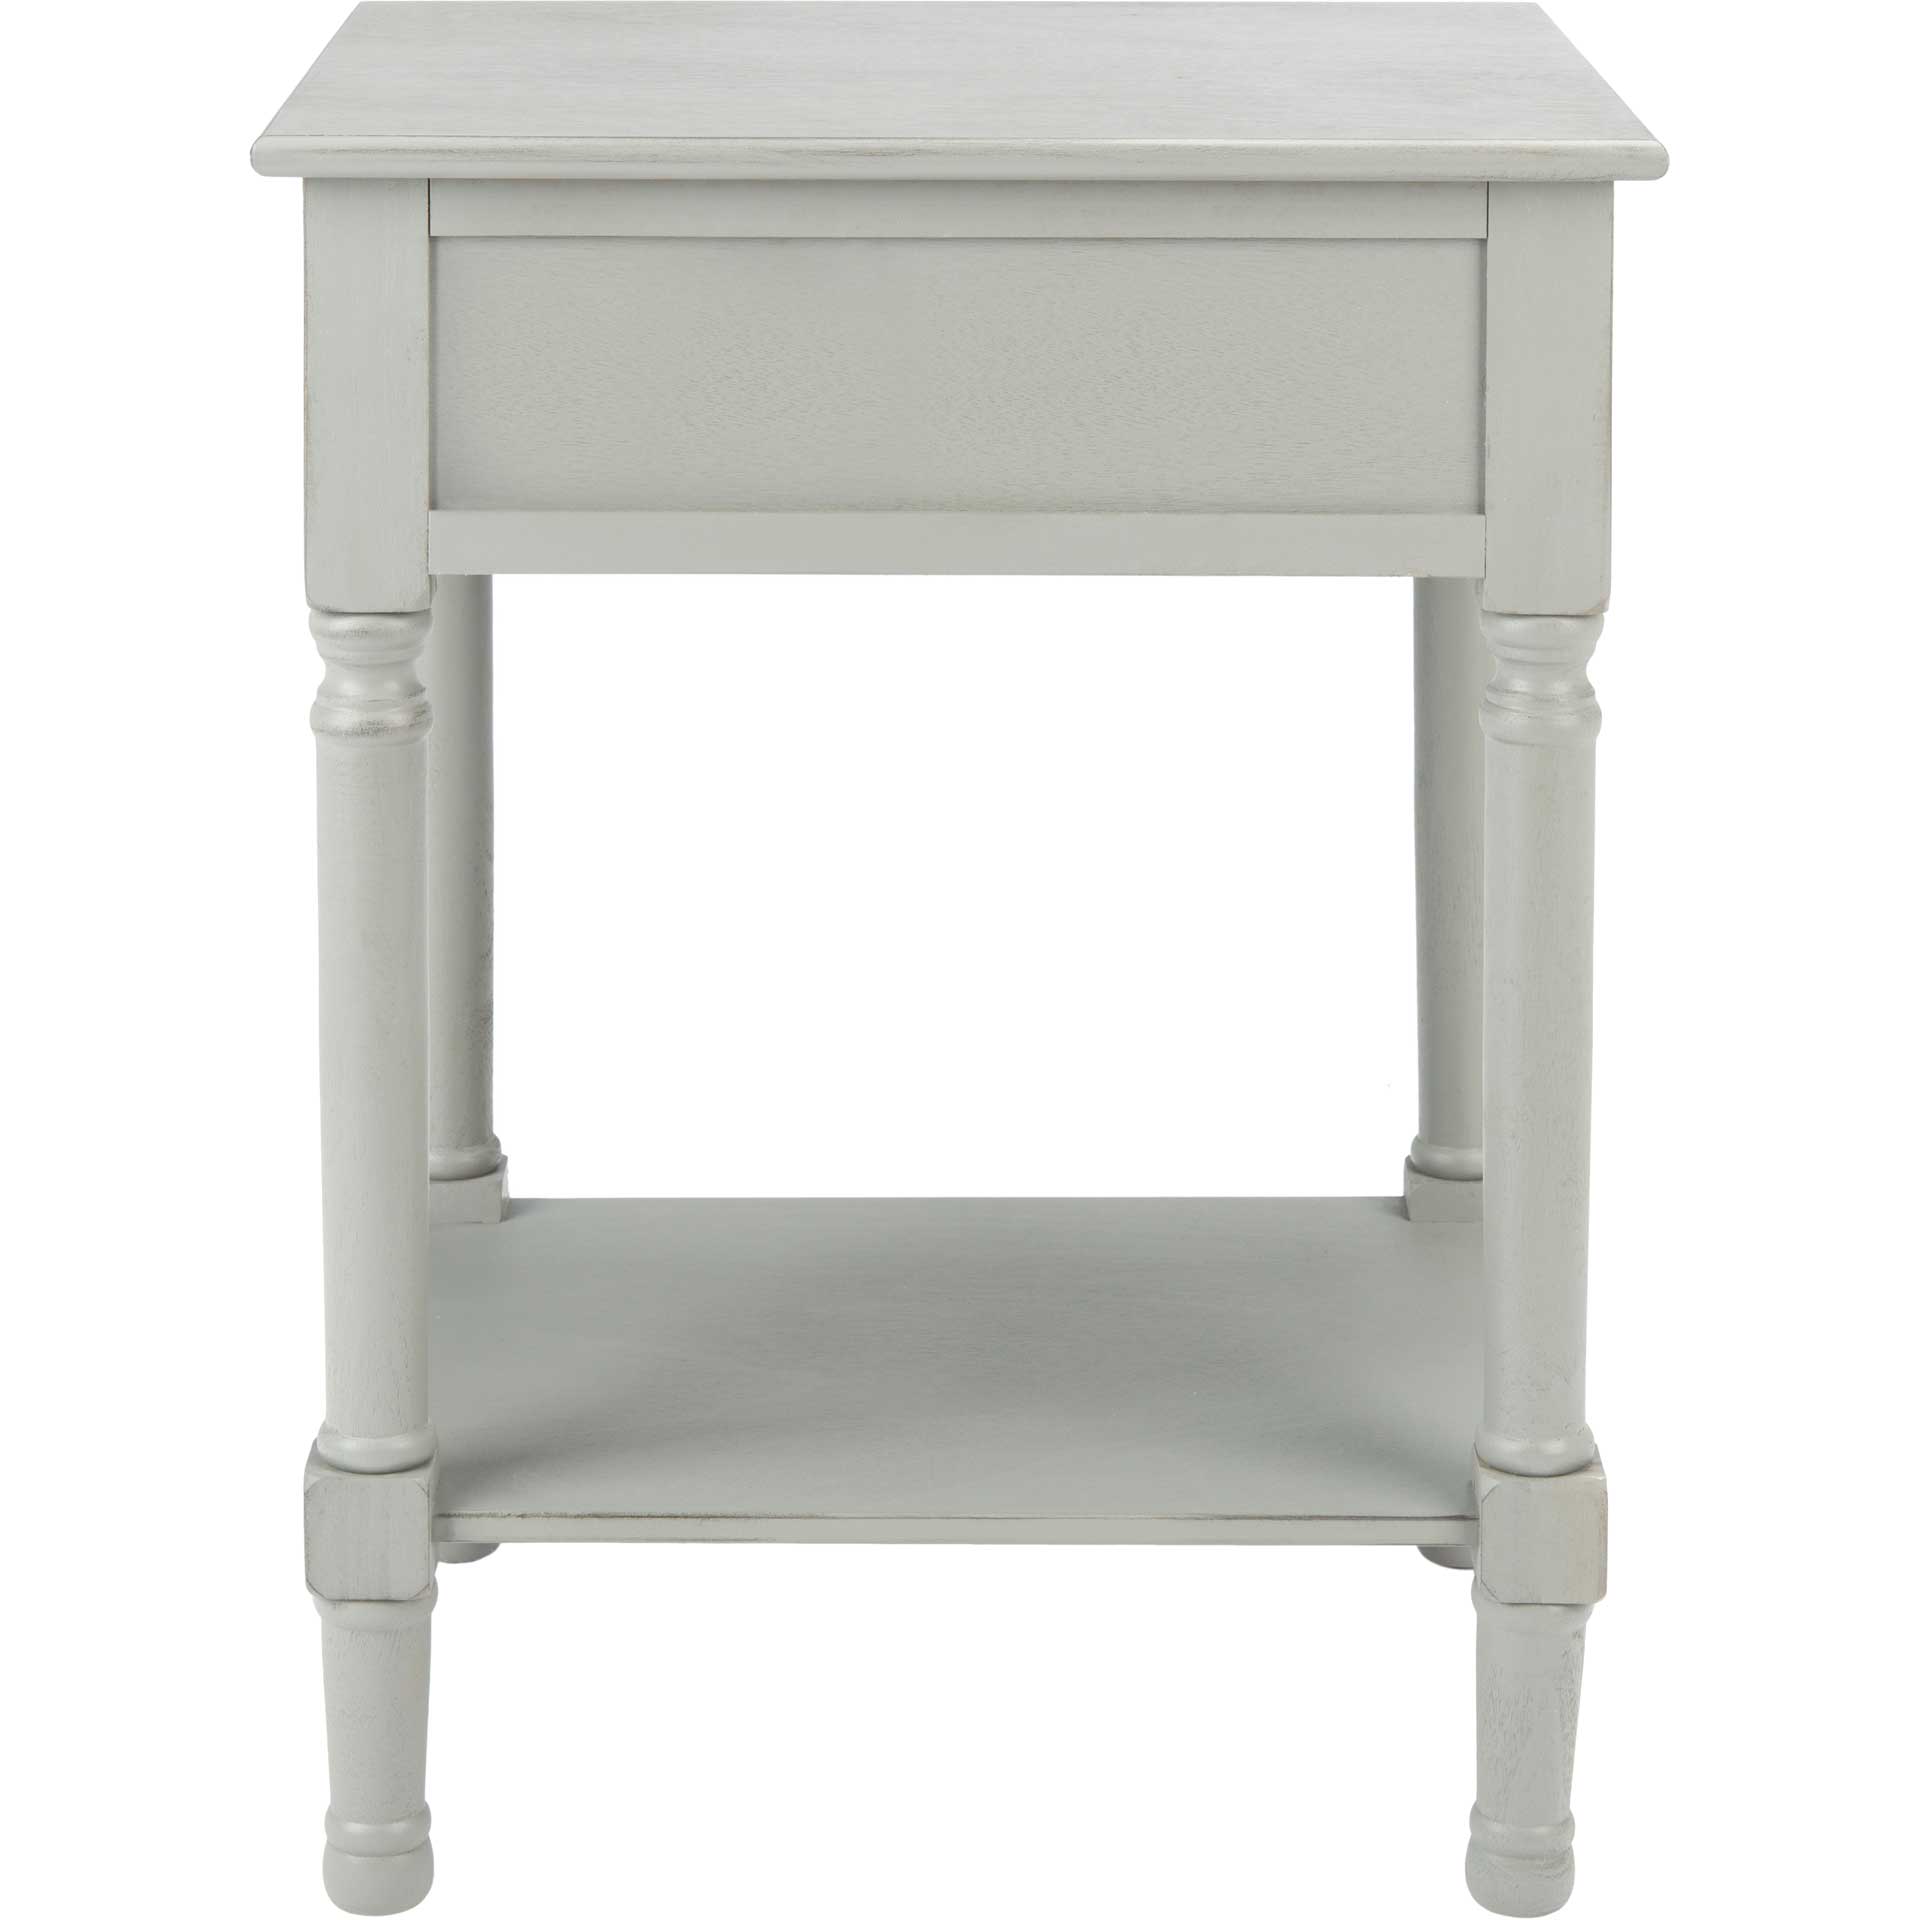 Haleigh 1 Drawer Accent Table Distressed Gray